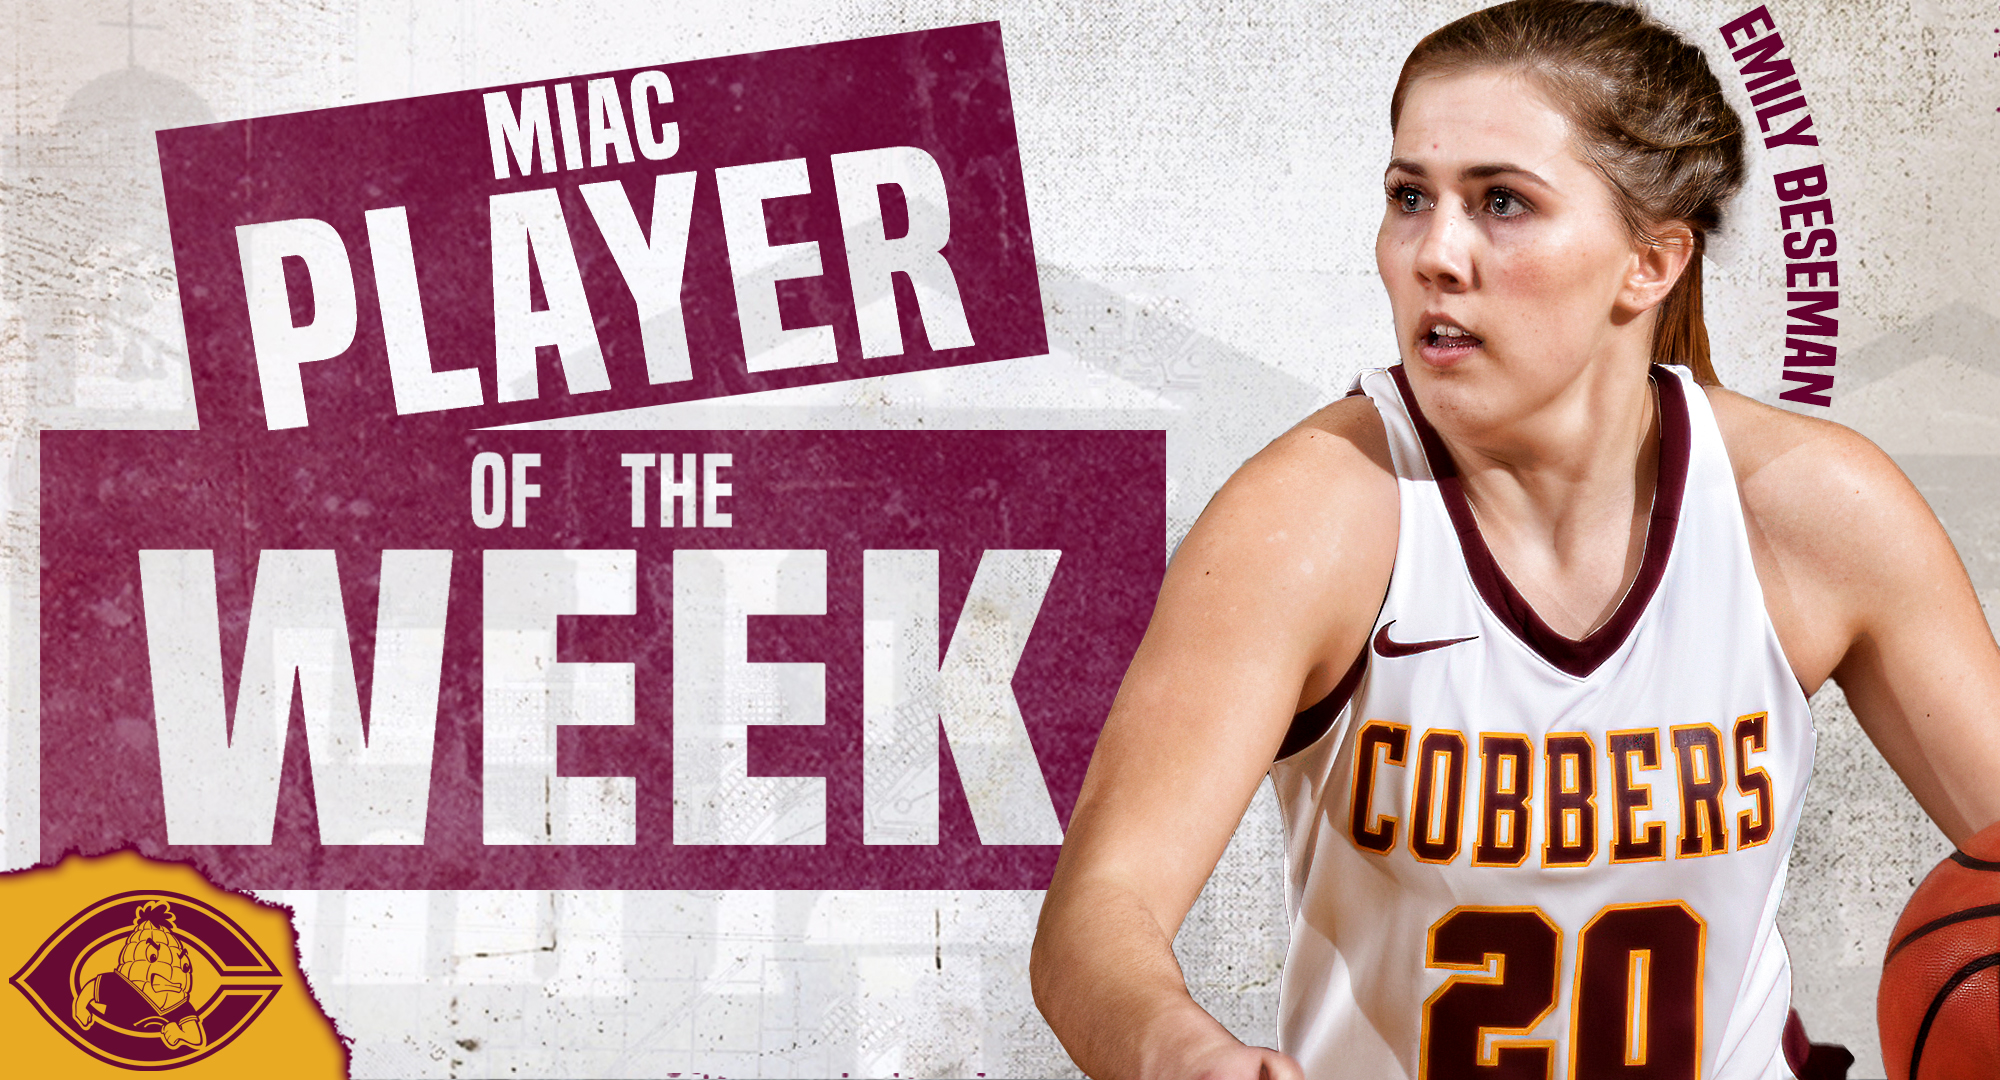 Emily Beseman was named the MIAC Player of the Week for helping the Cobbers go 2-0 on the week and averaging 20.5 points, 8.5 rebounds and 3.5 assists against St. Ben's and Bethel.